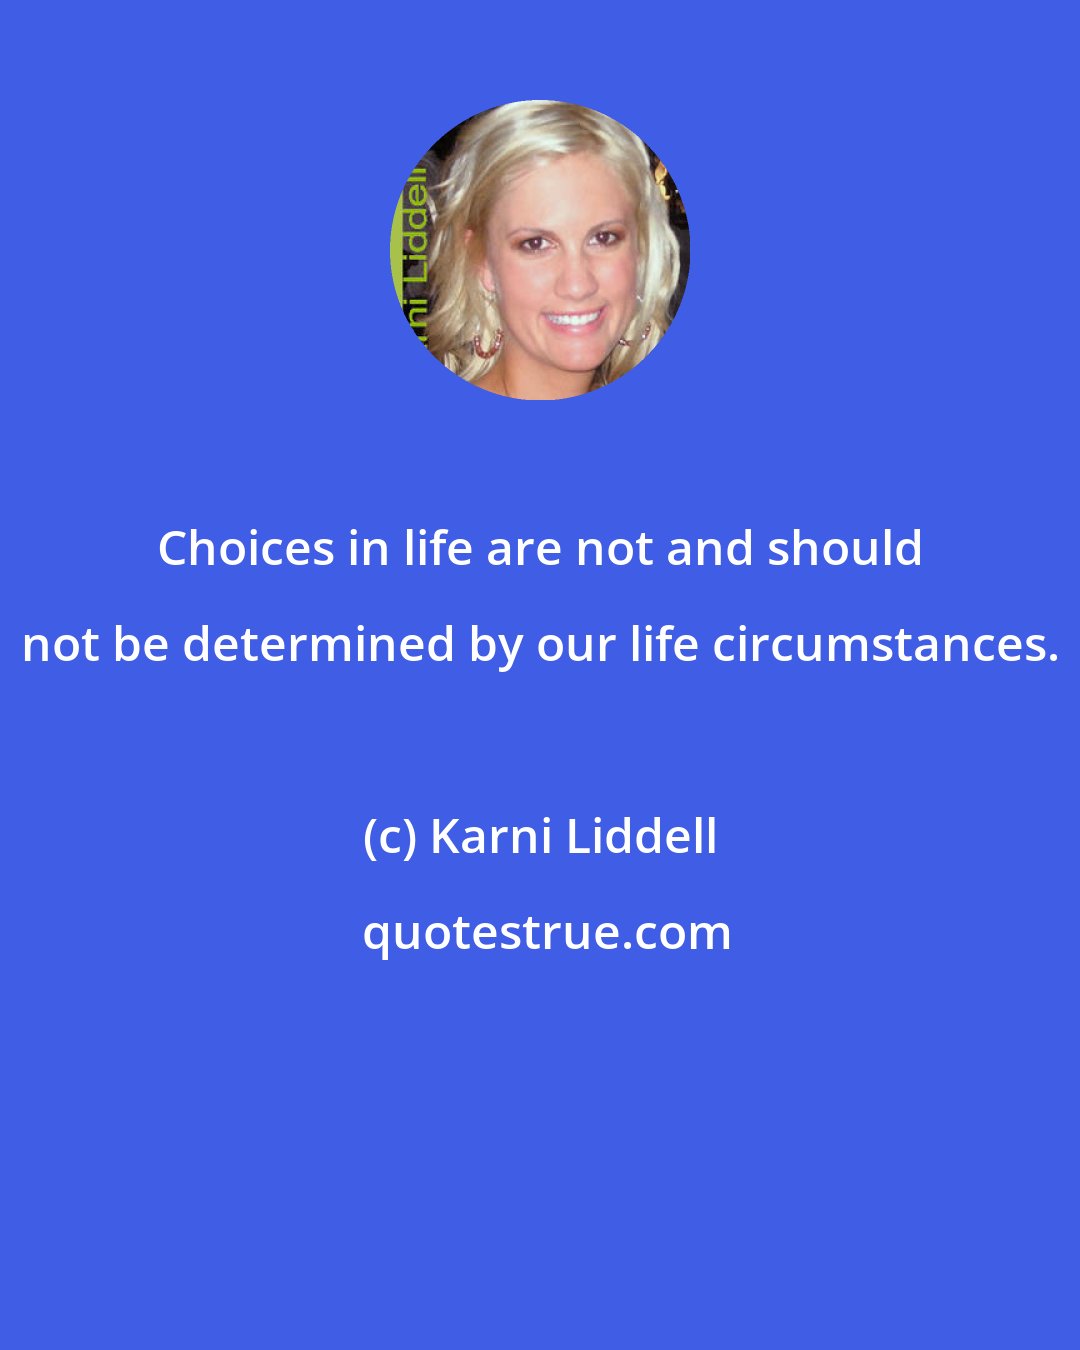 Karni Liddell: Choices in life are not and should not be determined by our life circumstances.